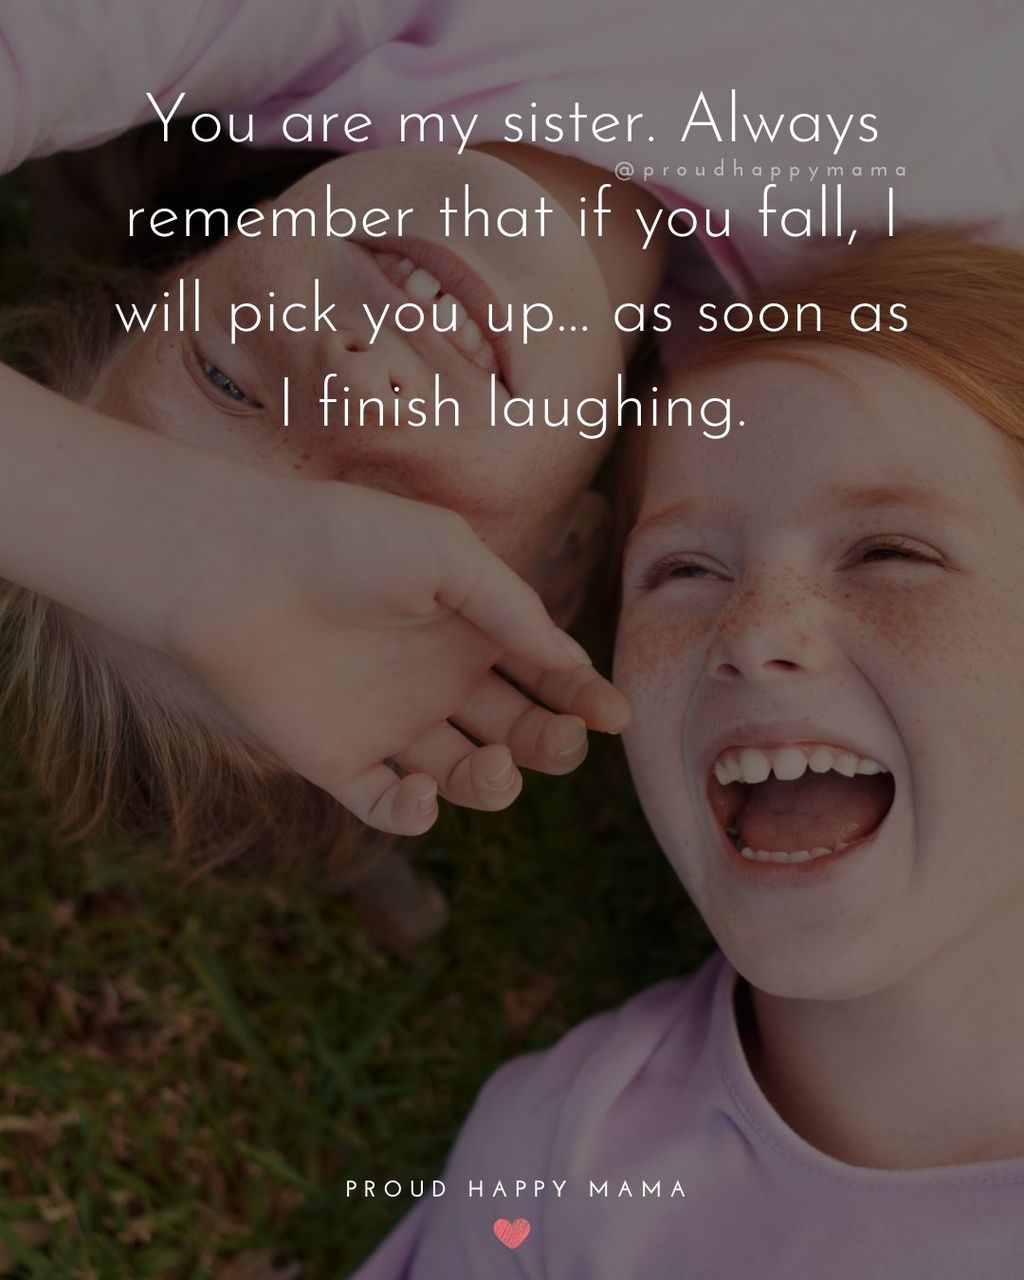 Sister Quotes - You are my sister. Always remember that if you fall, I will pick you up… as soon as I finish laughing.